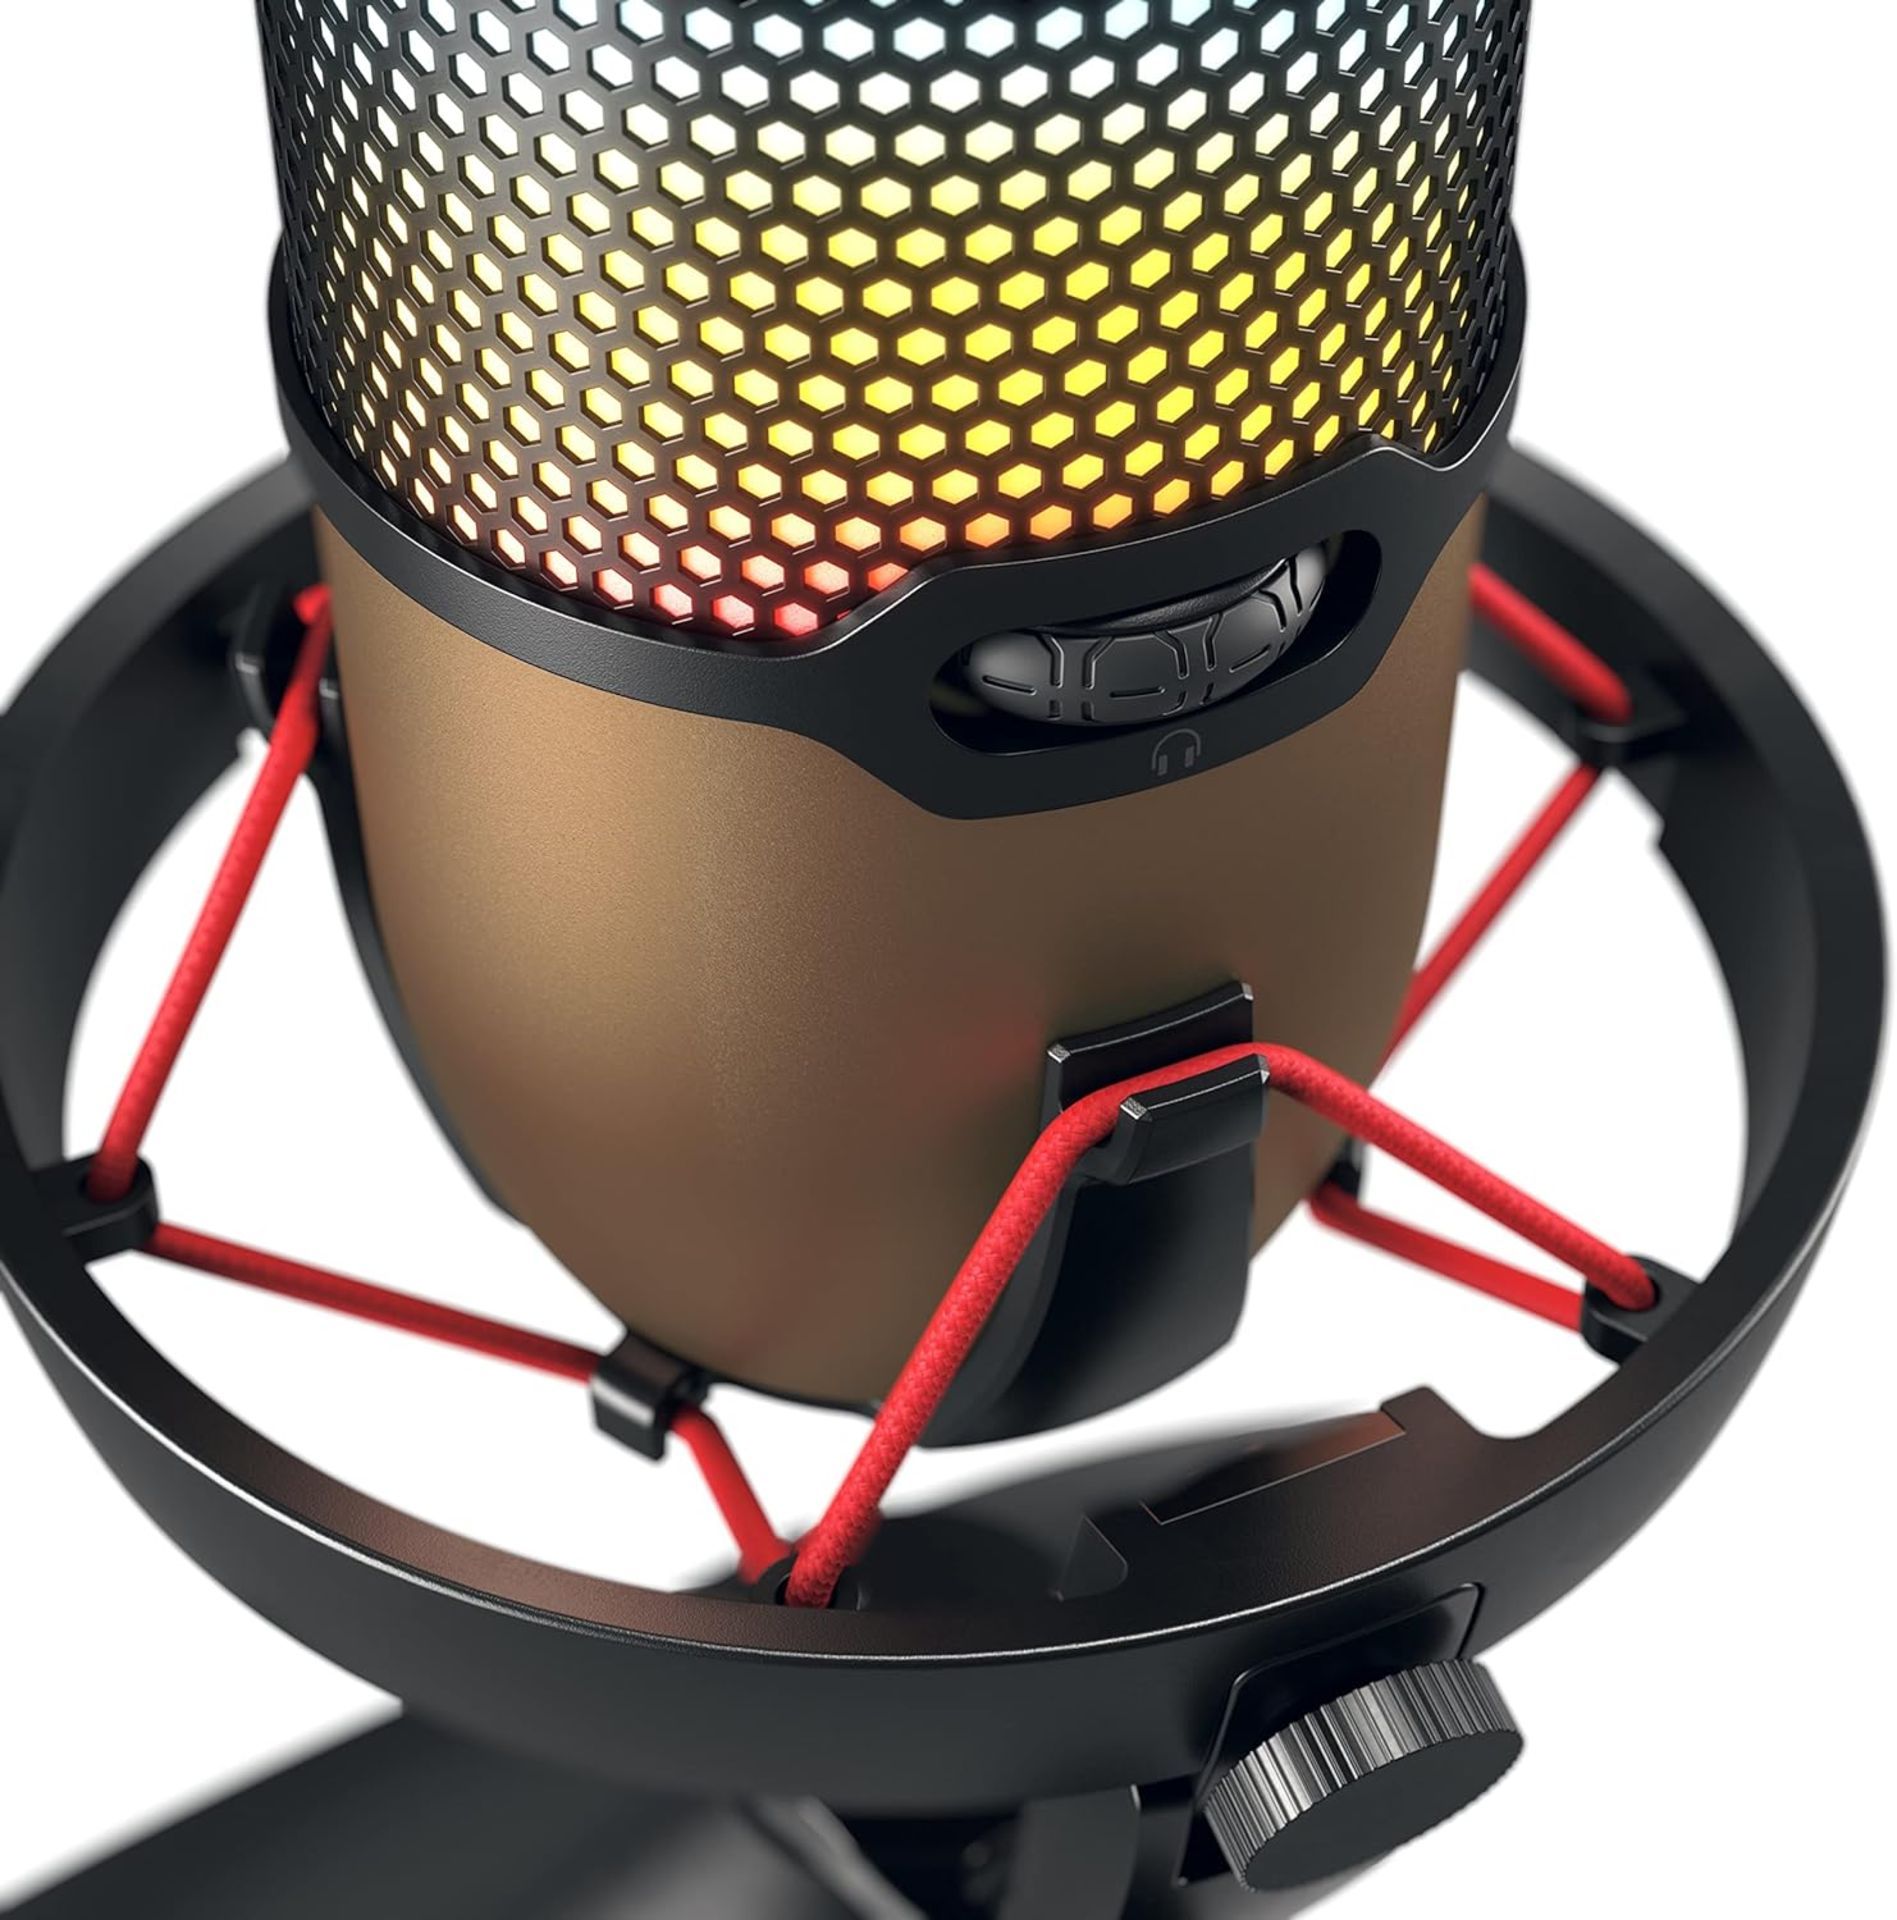 NEW & BOXED CHERRY UM 9.0 Pro RGB Black USB Desk Microphone with Shock Mount. RRP £127.99. The - Image 8 of 8